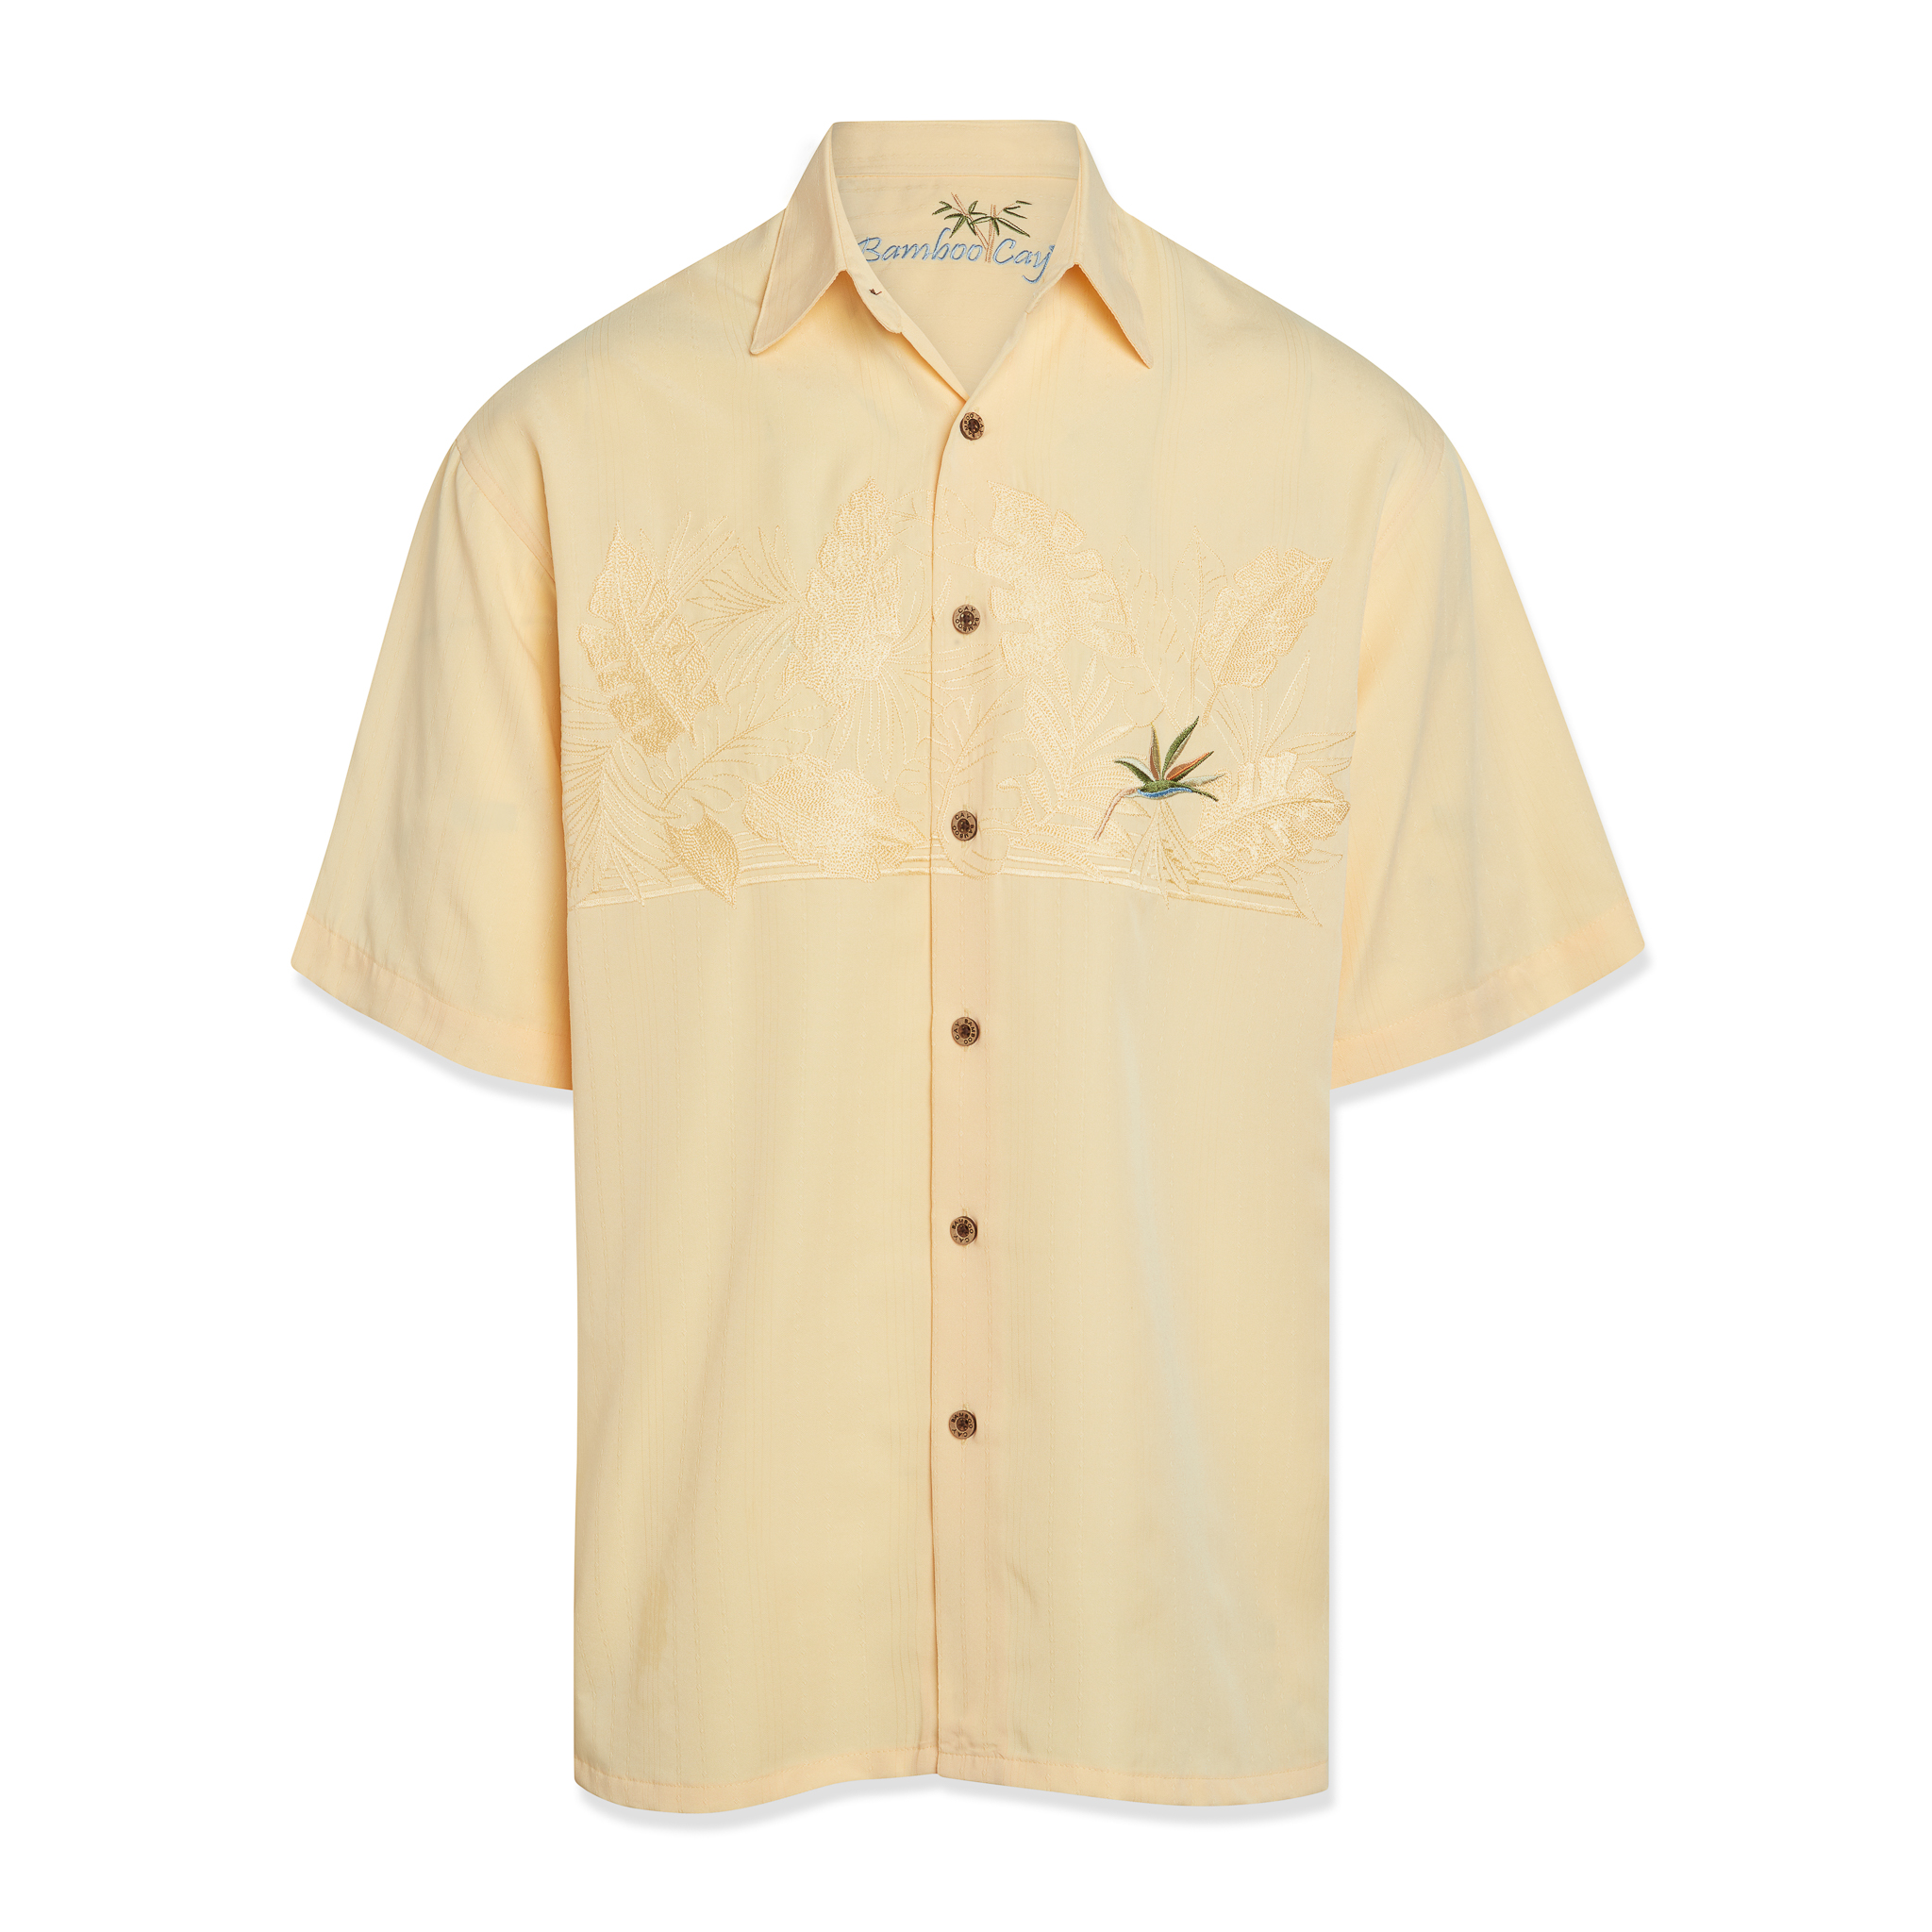 bamboo cay mens embroidered chest bird of paradise tropical button down shirt